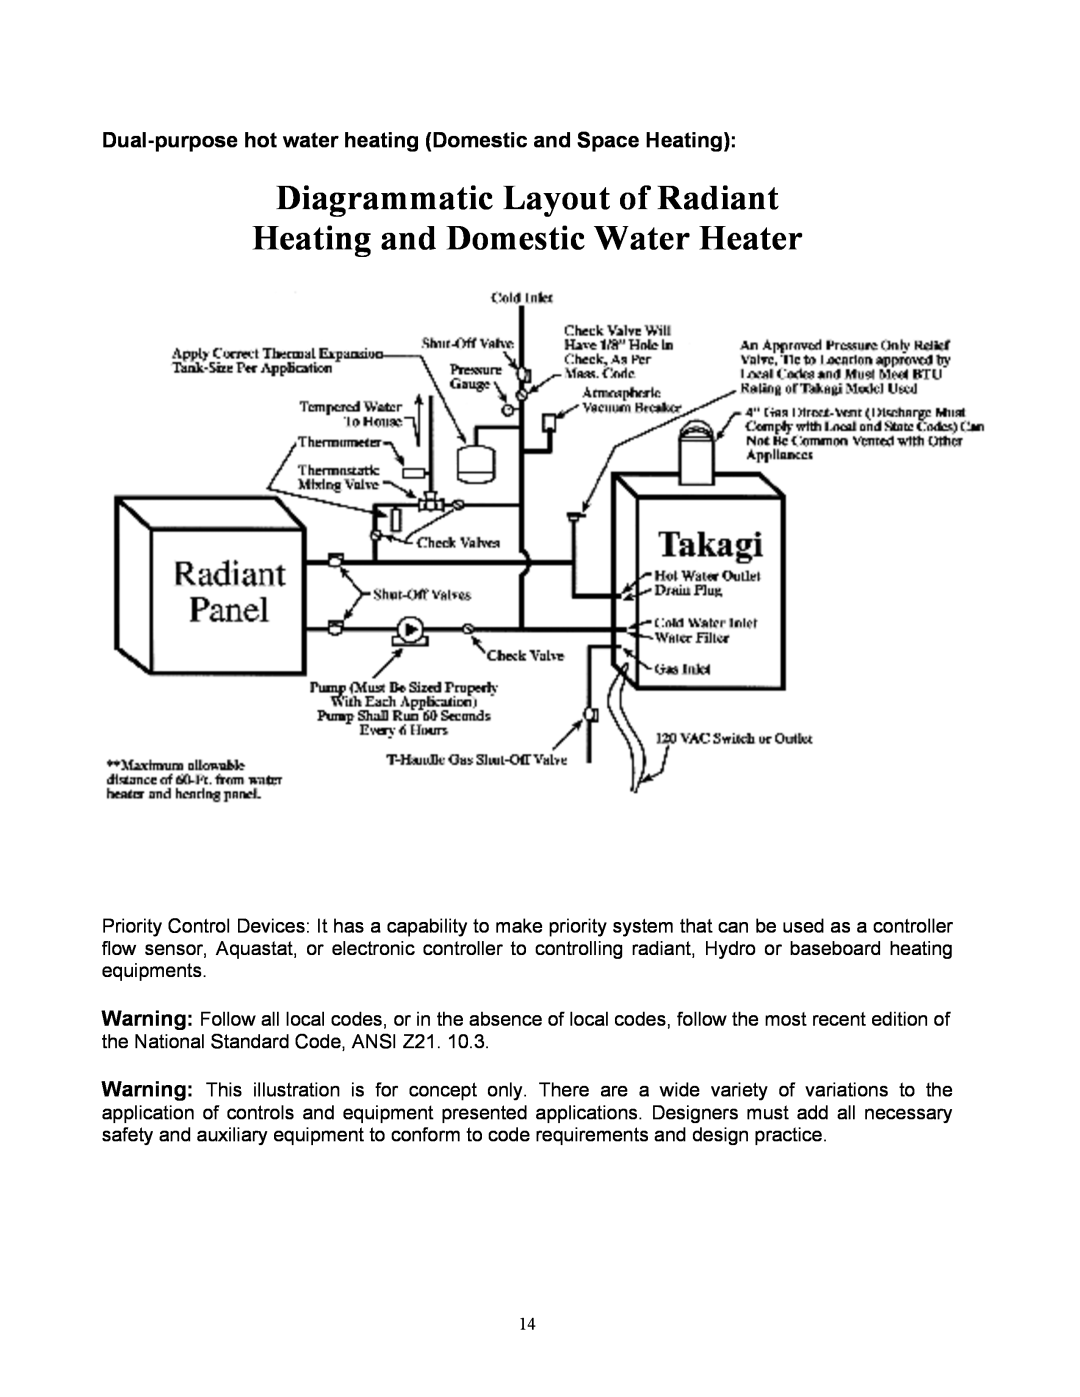 Whirlpool T-K1S installation manual Diagrammatic Layout of Radiant, Heating and Domestic Water Heater 